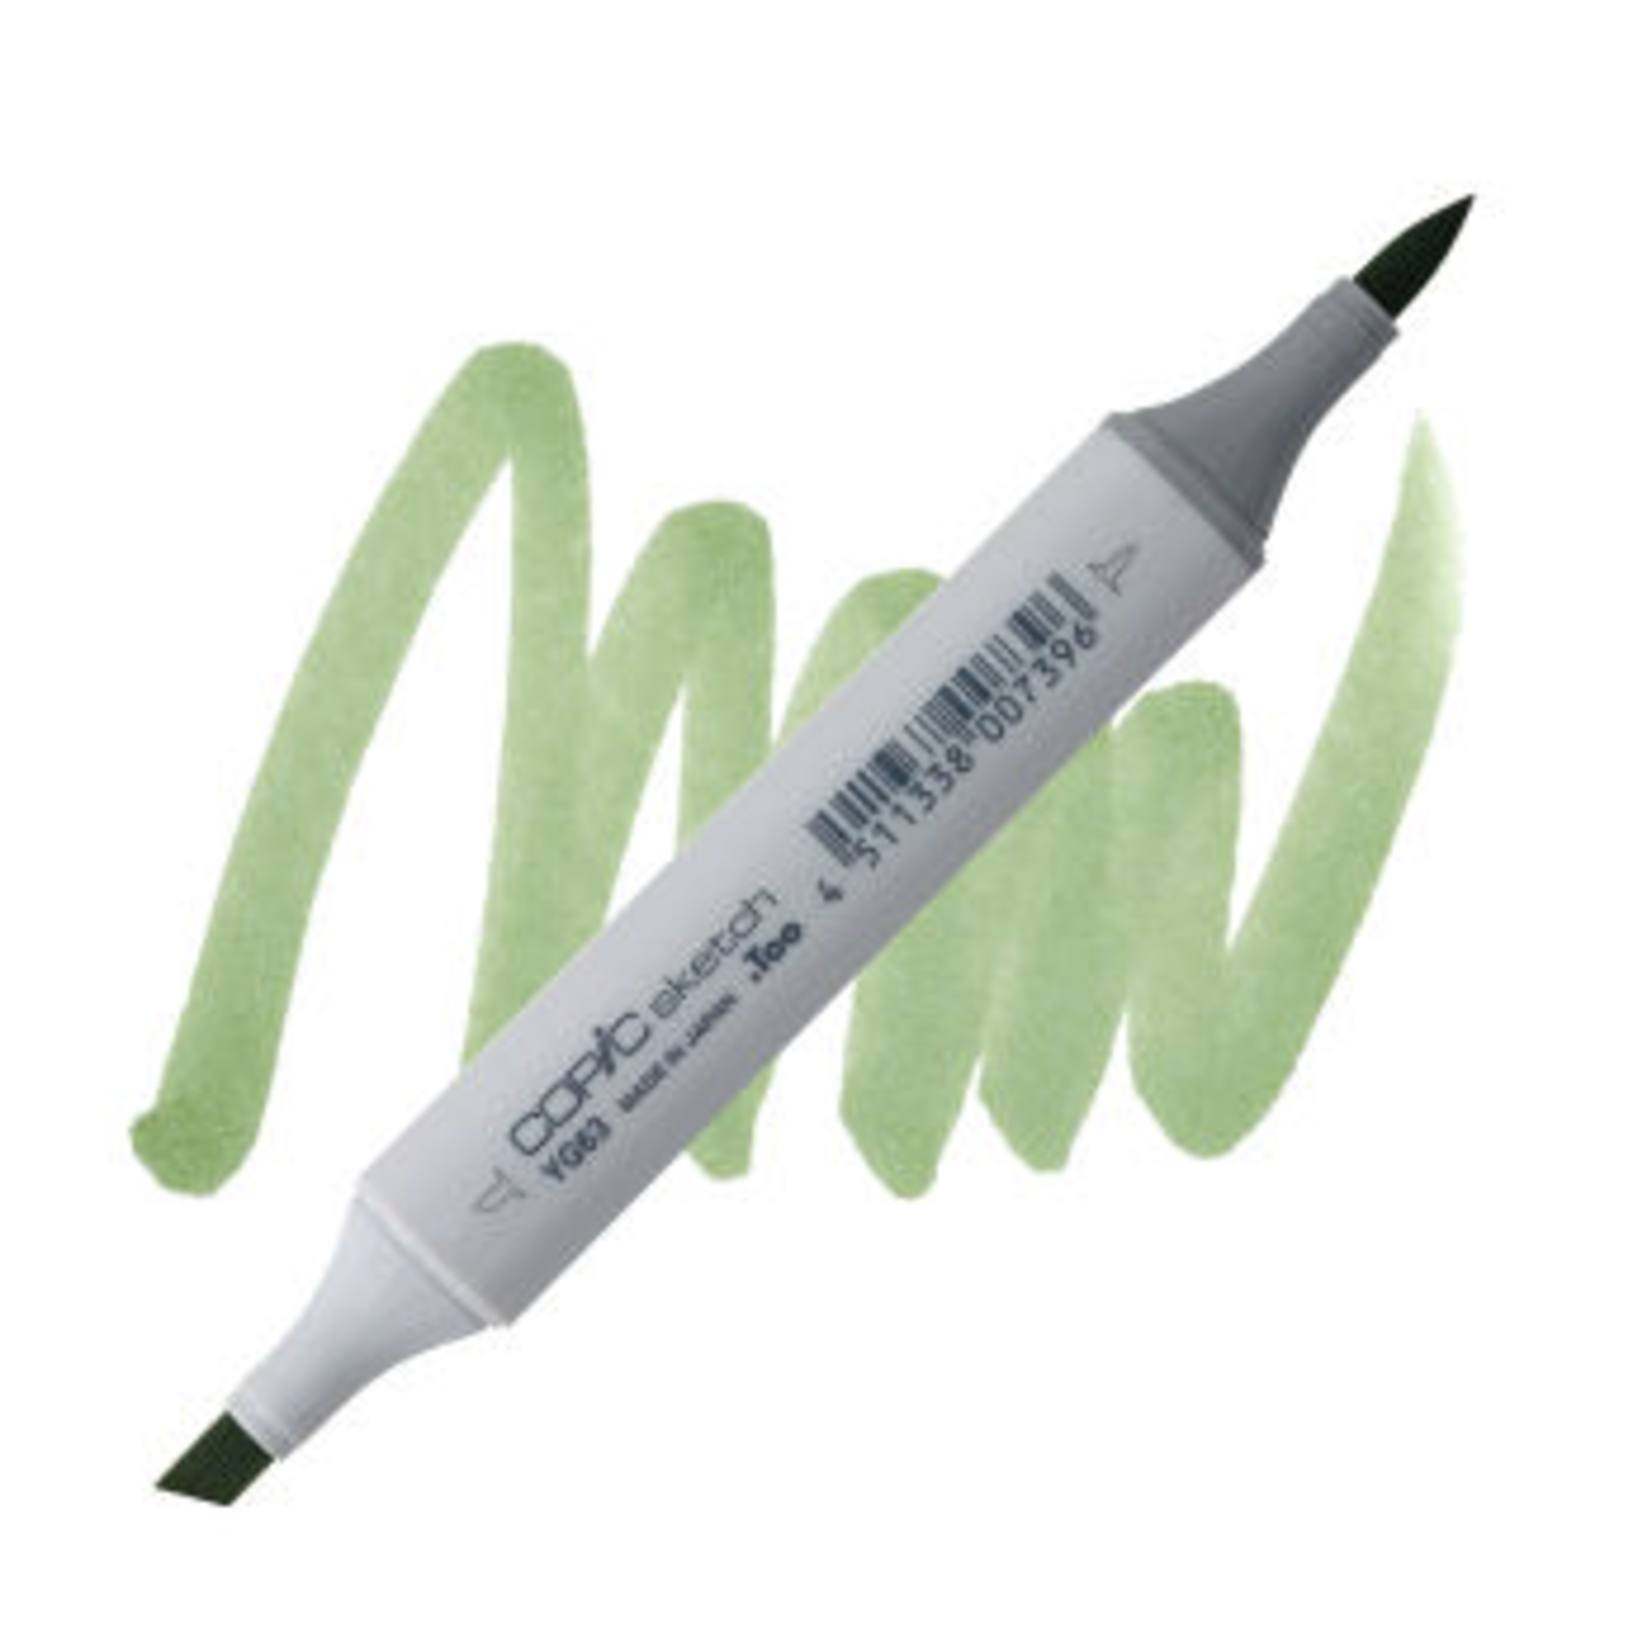 Copic Copic Sketch YG63 - Pea Green